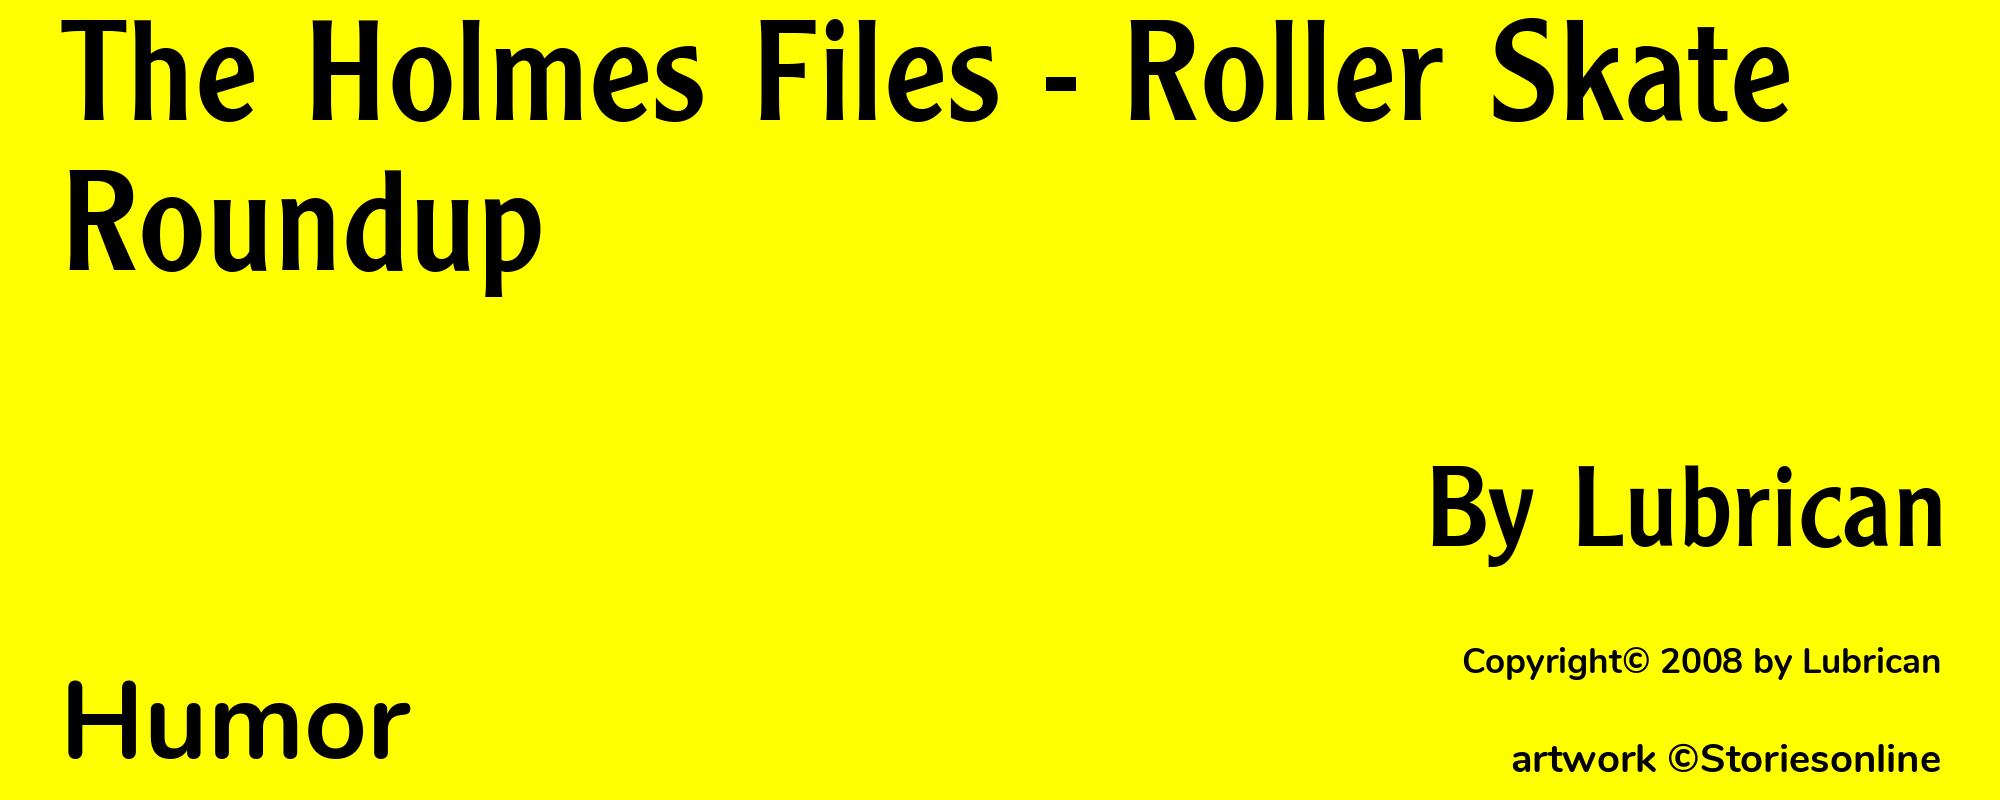 The Holmes Files - Roller Skate Roundup - Cover